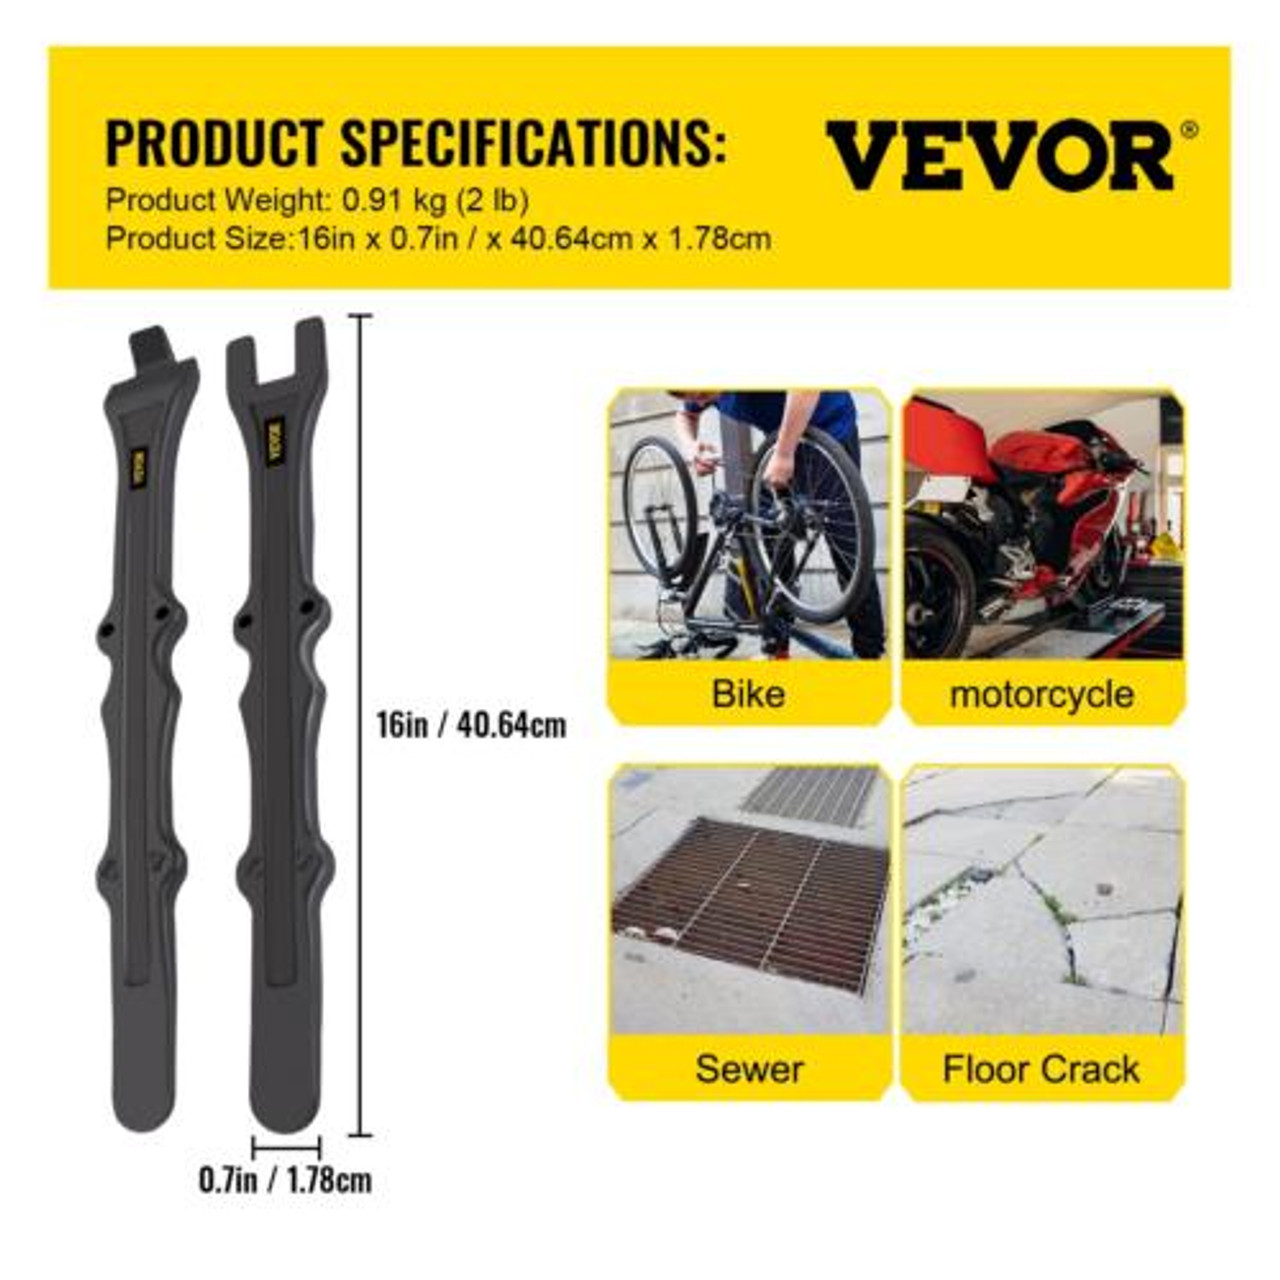 VEVOR Tire Changing Tool, 16 Inch Tire Iron Set, 2pcs Motorcycle Tire Irons, 40C